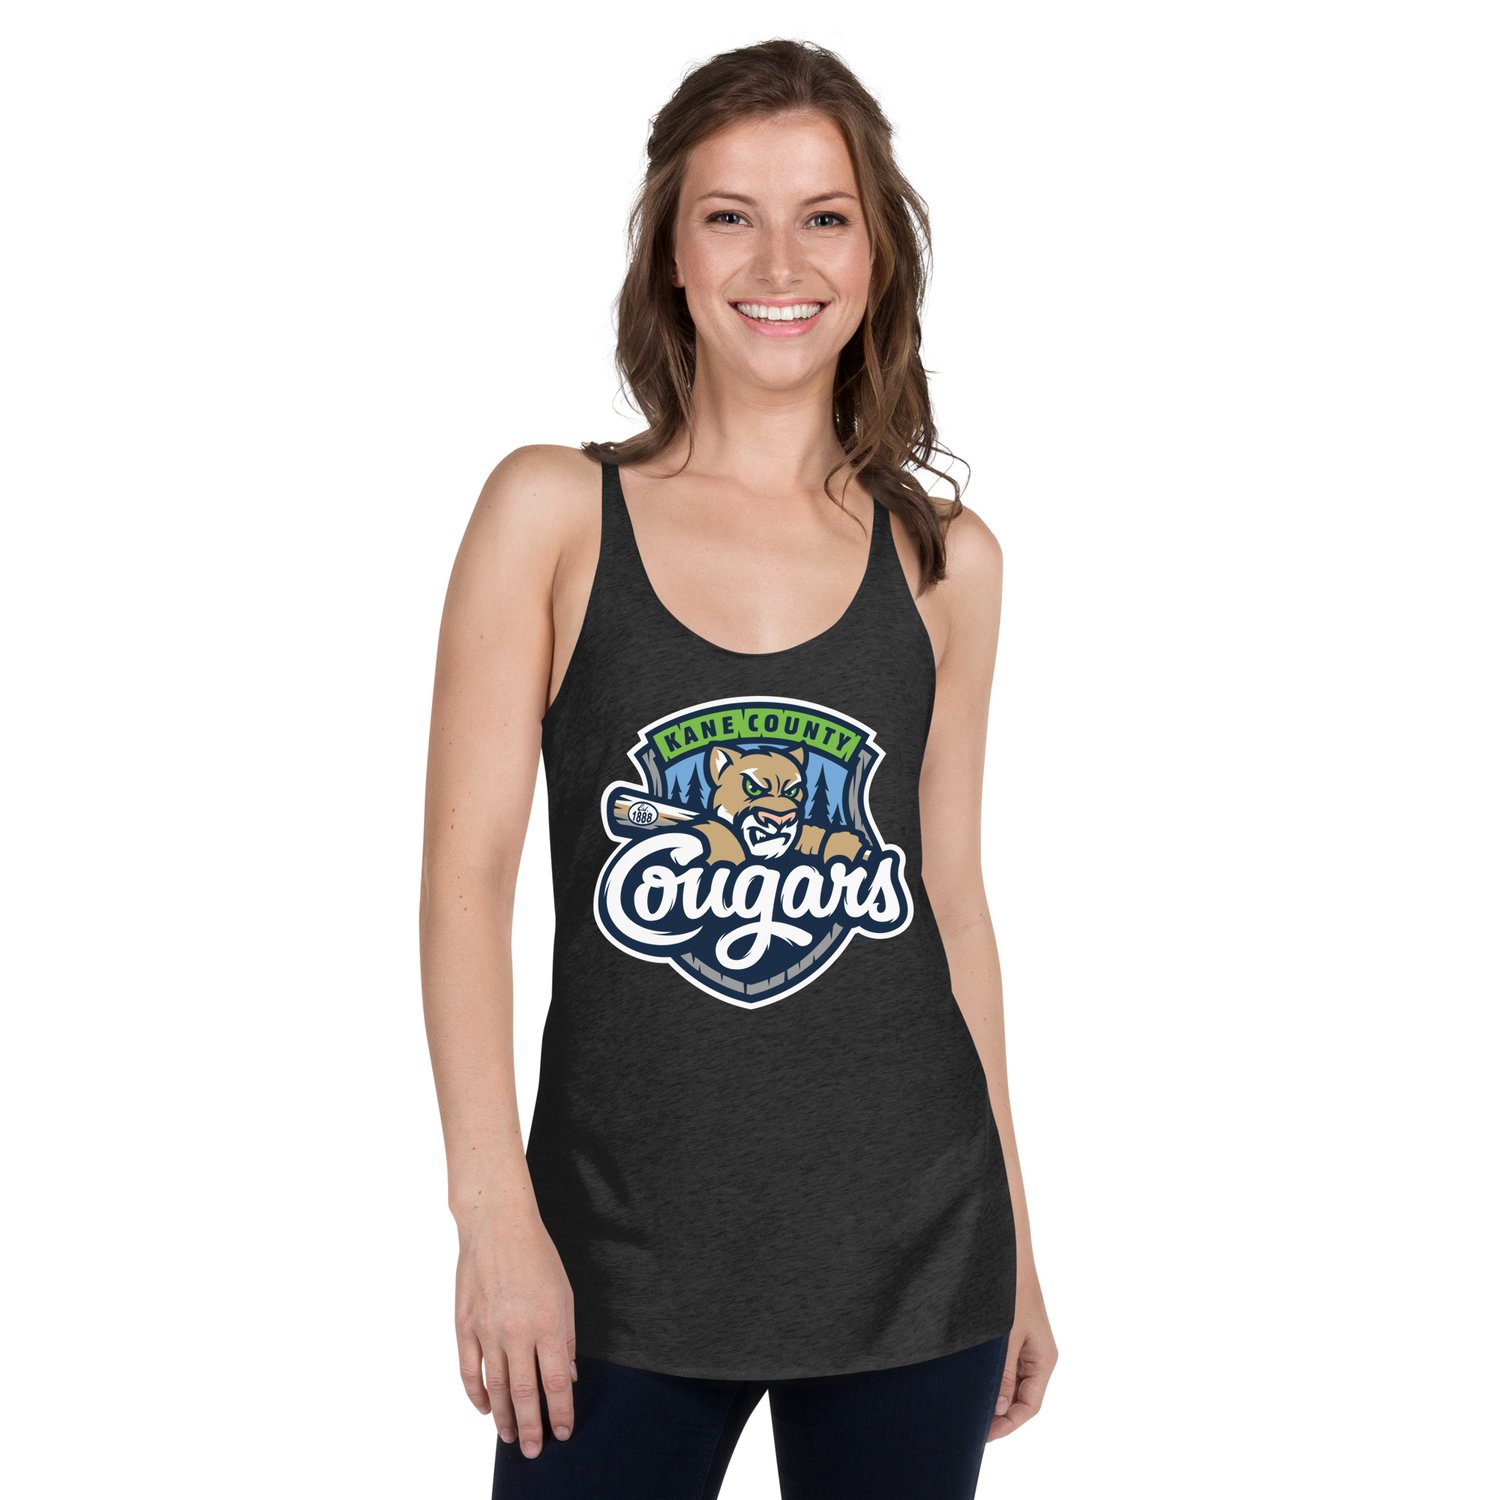 Women's Racerback Tank Cougars Primary Logo — Kane County Cougars